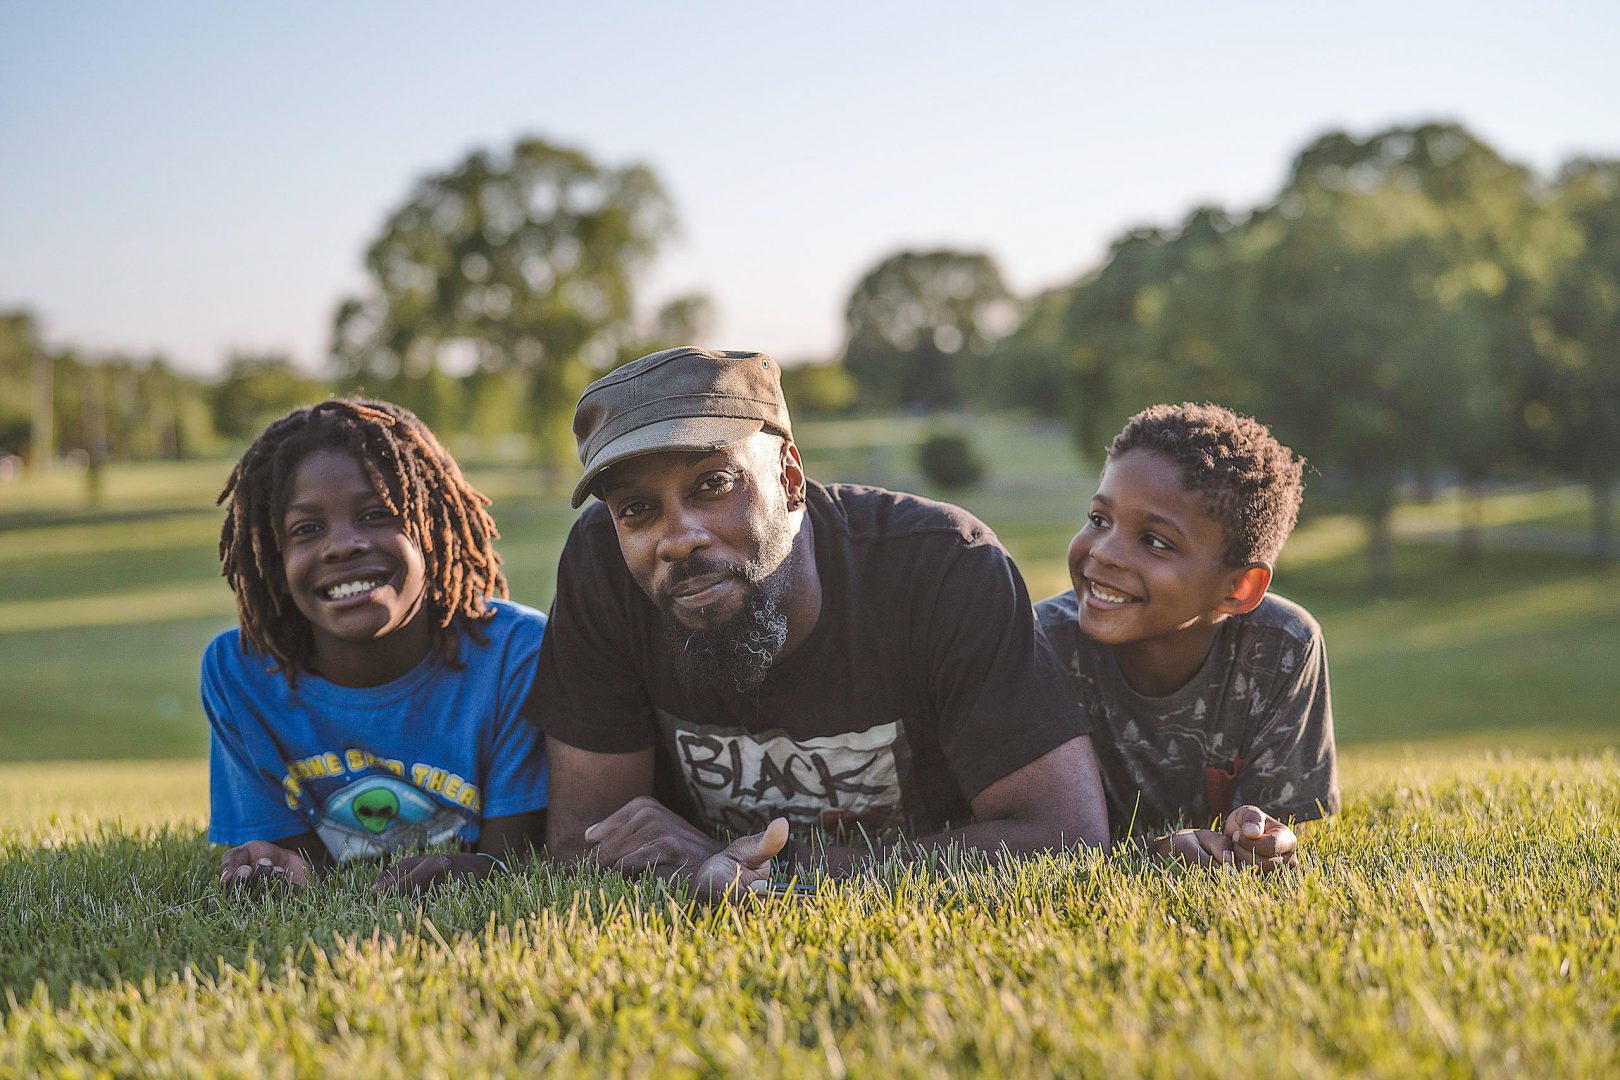 Family and relationship professor Adrian Mack shares his views on fatherhood